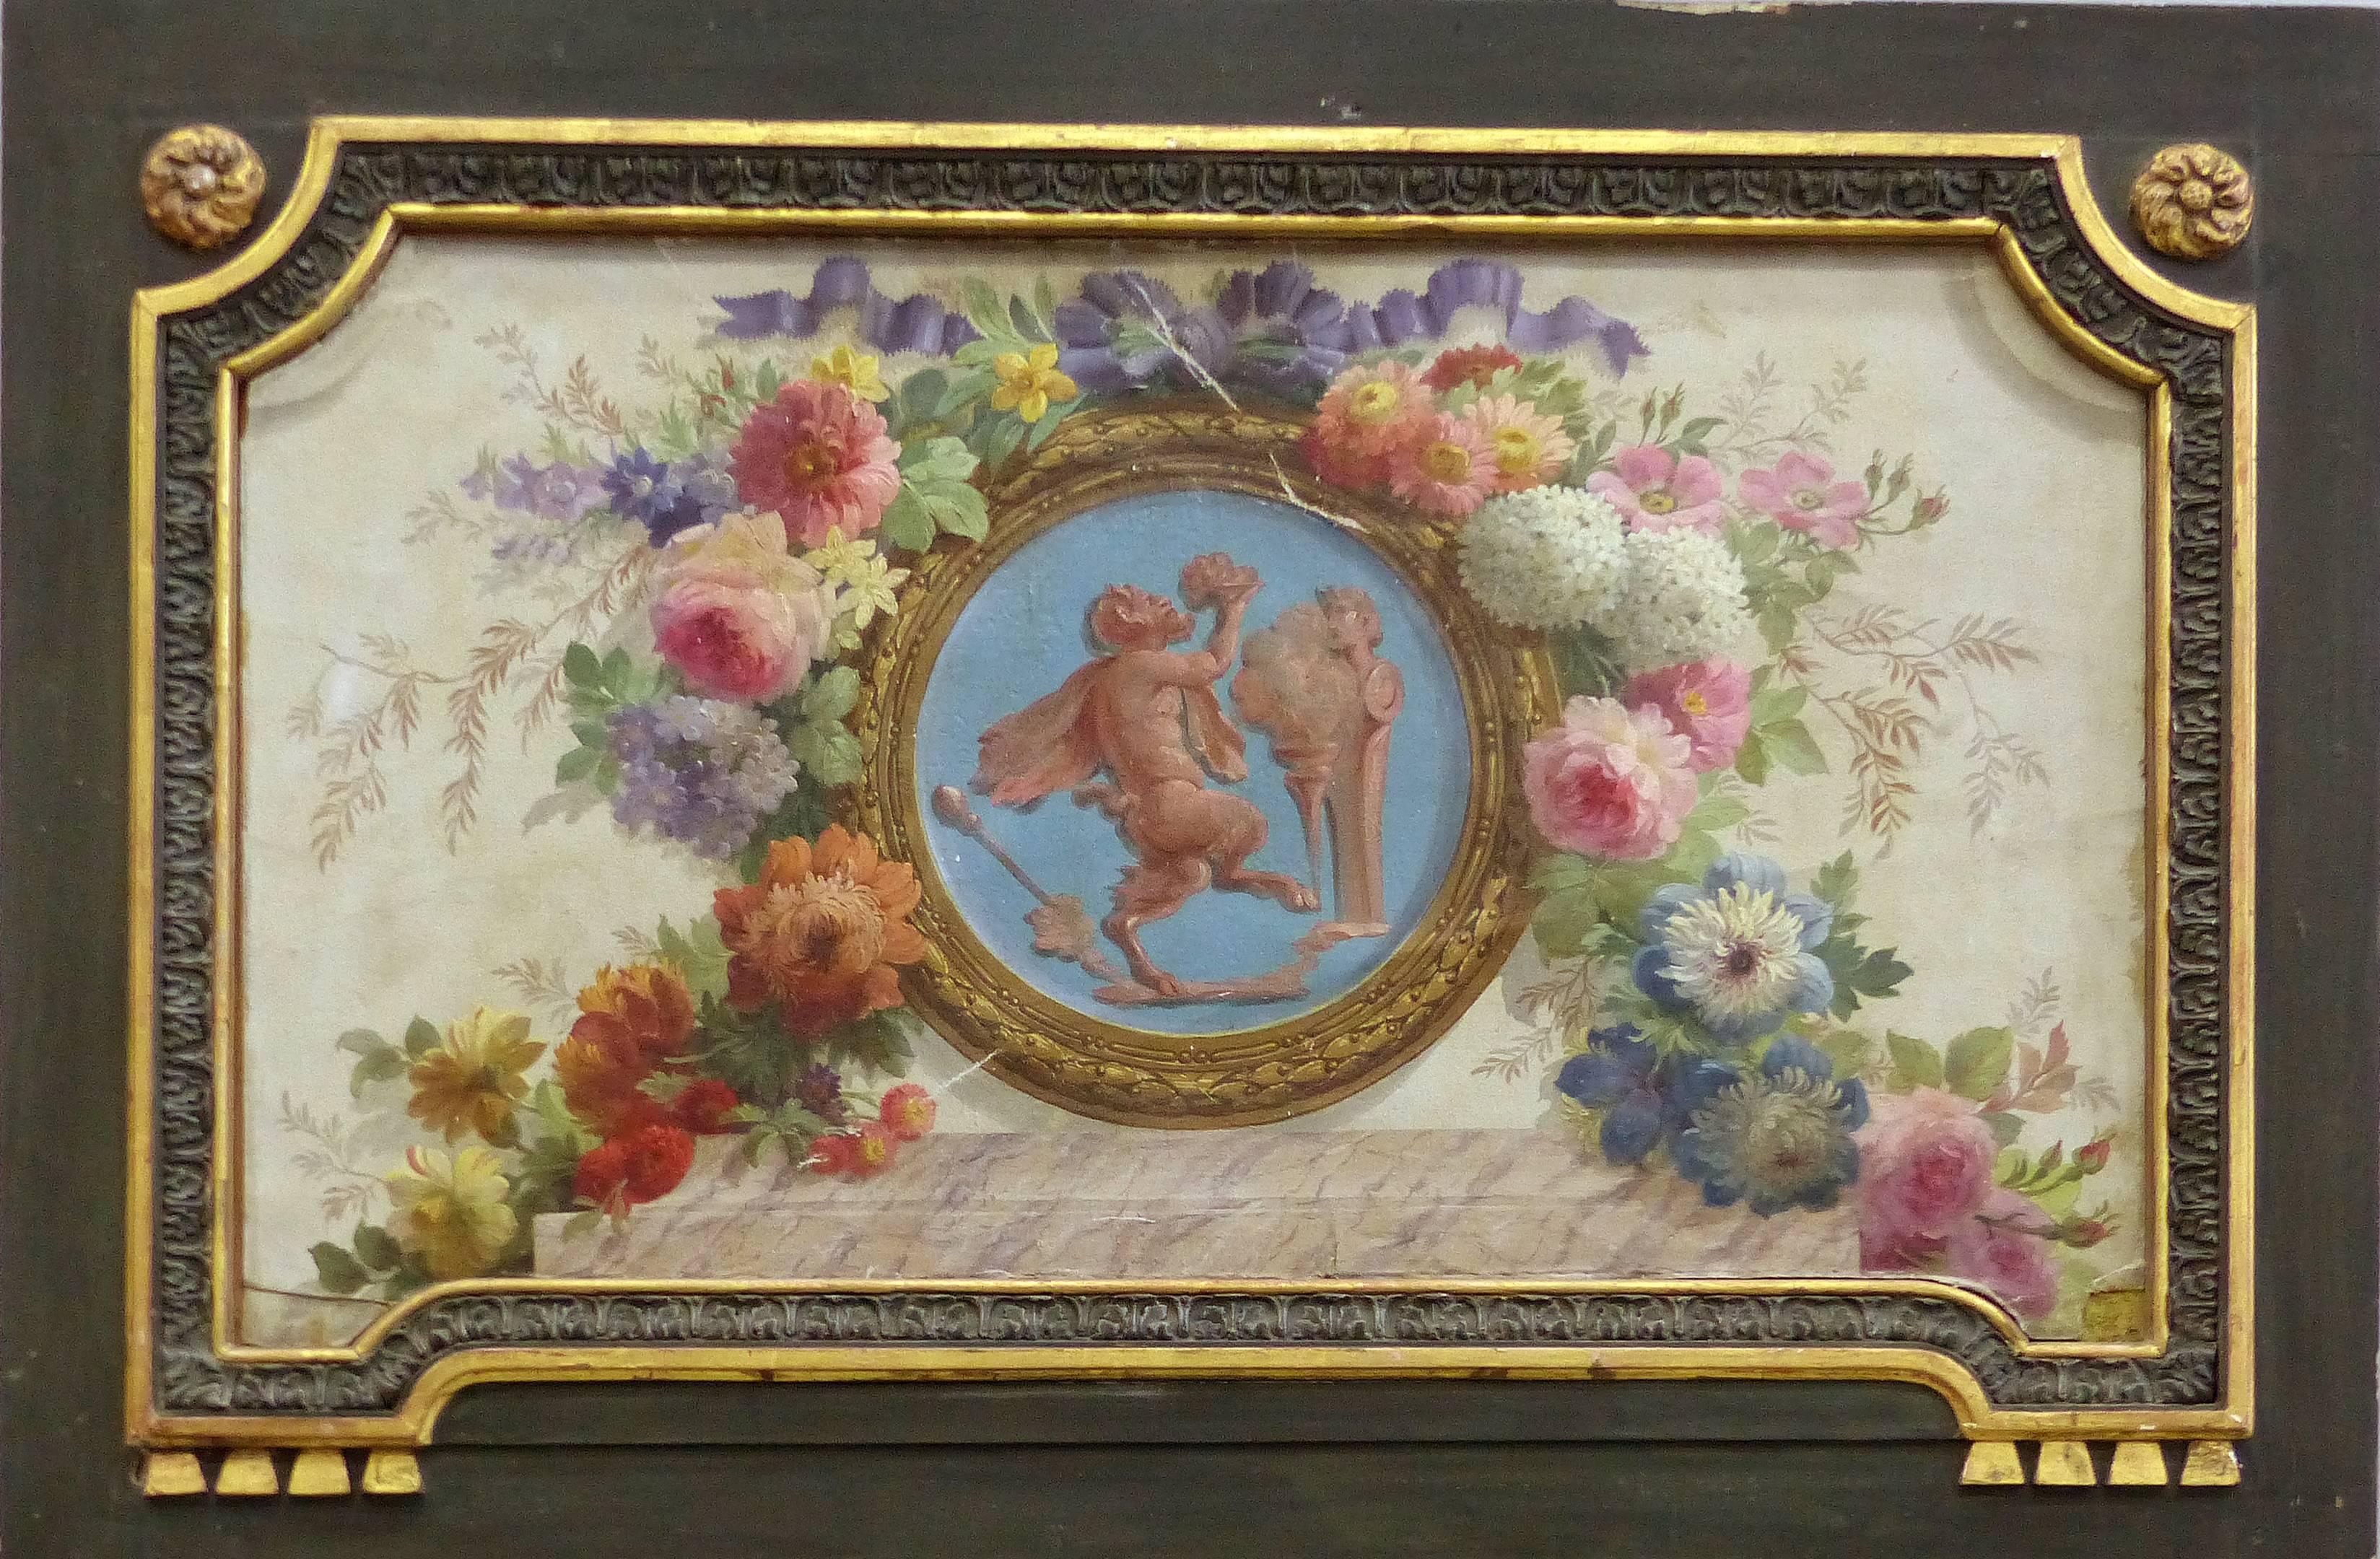 Monumental French Hand-Painted Trumeau Mirrors, Pair

A large and substantial pair of painted French trumeau mirrors with painted panels which depict bacchanalia fauns with a floral wreath surrounding them. The frames are poly-chromed with a green